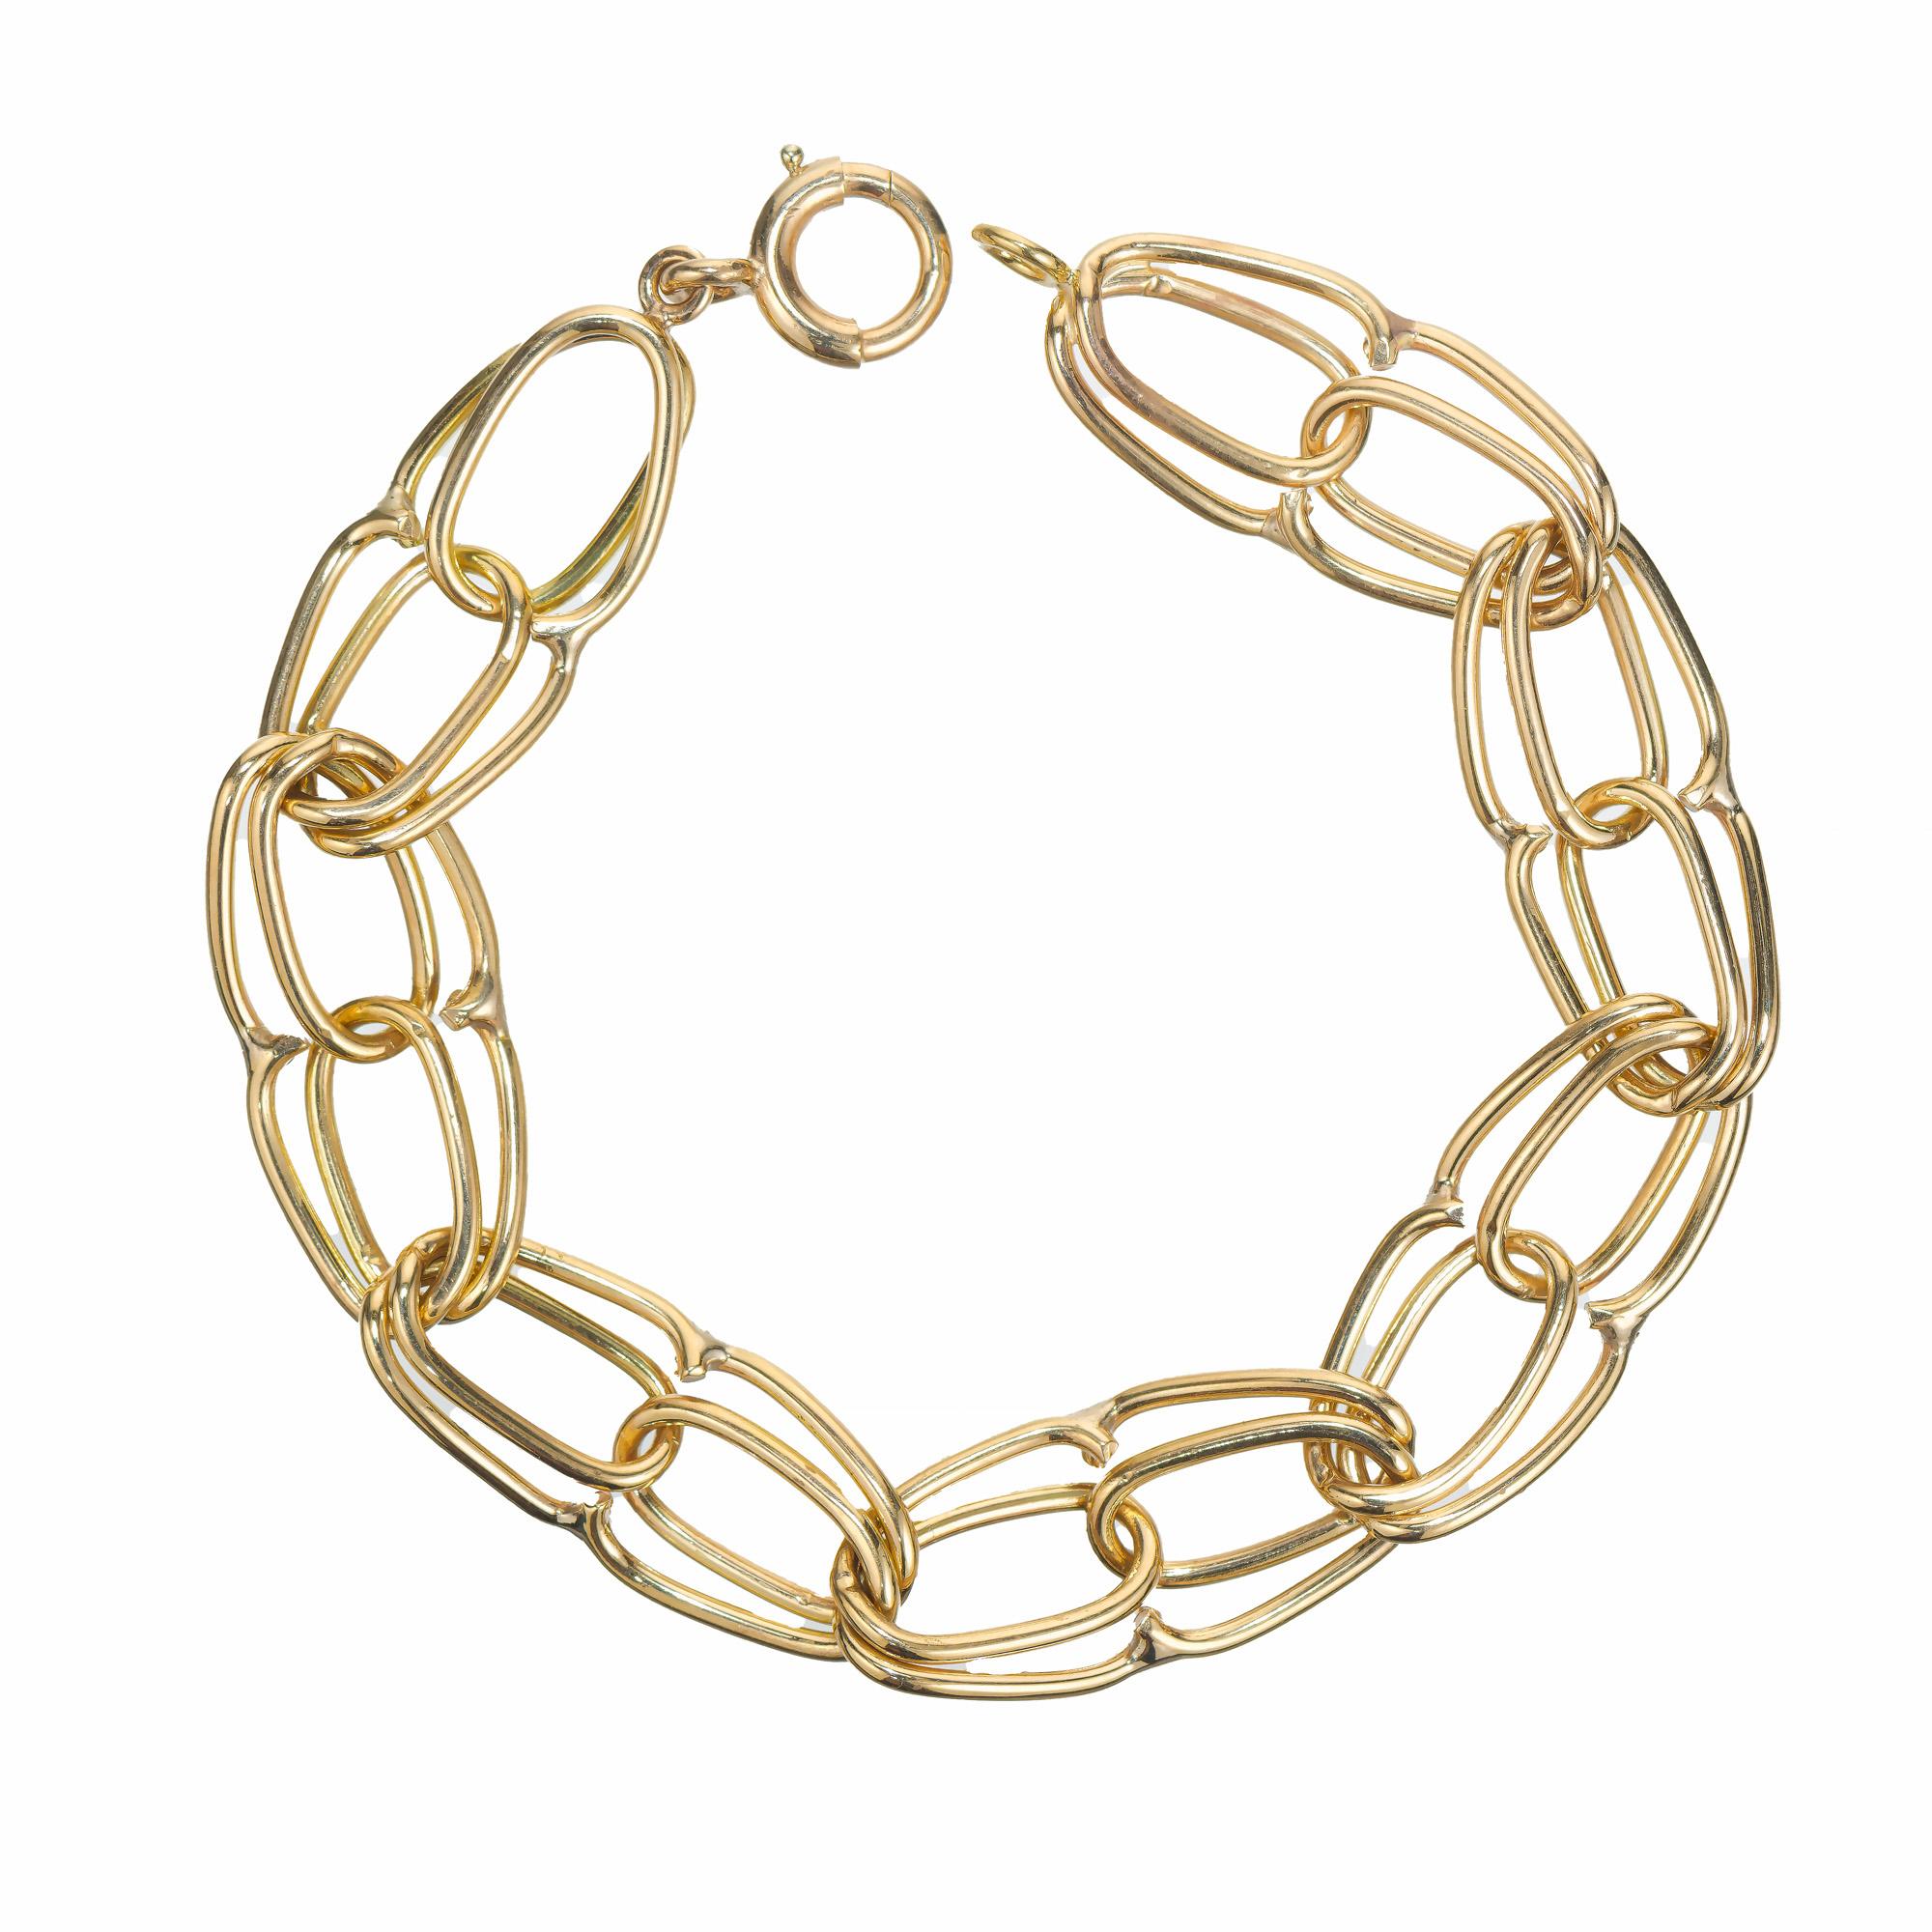 1960's Double link, 14k yellow gold handmade wire link 7 Inch Bracelet. 

14k yellow gold 
Tested: 14k
18.7 grams
Bracelet: 7 Inches
Width: 11.9mm
Thickness/depth 3.8mm
